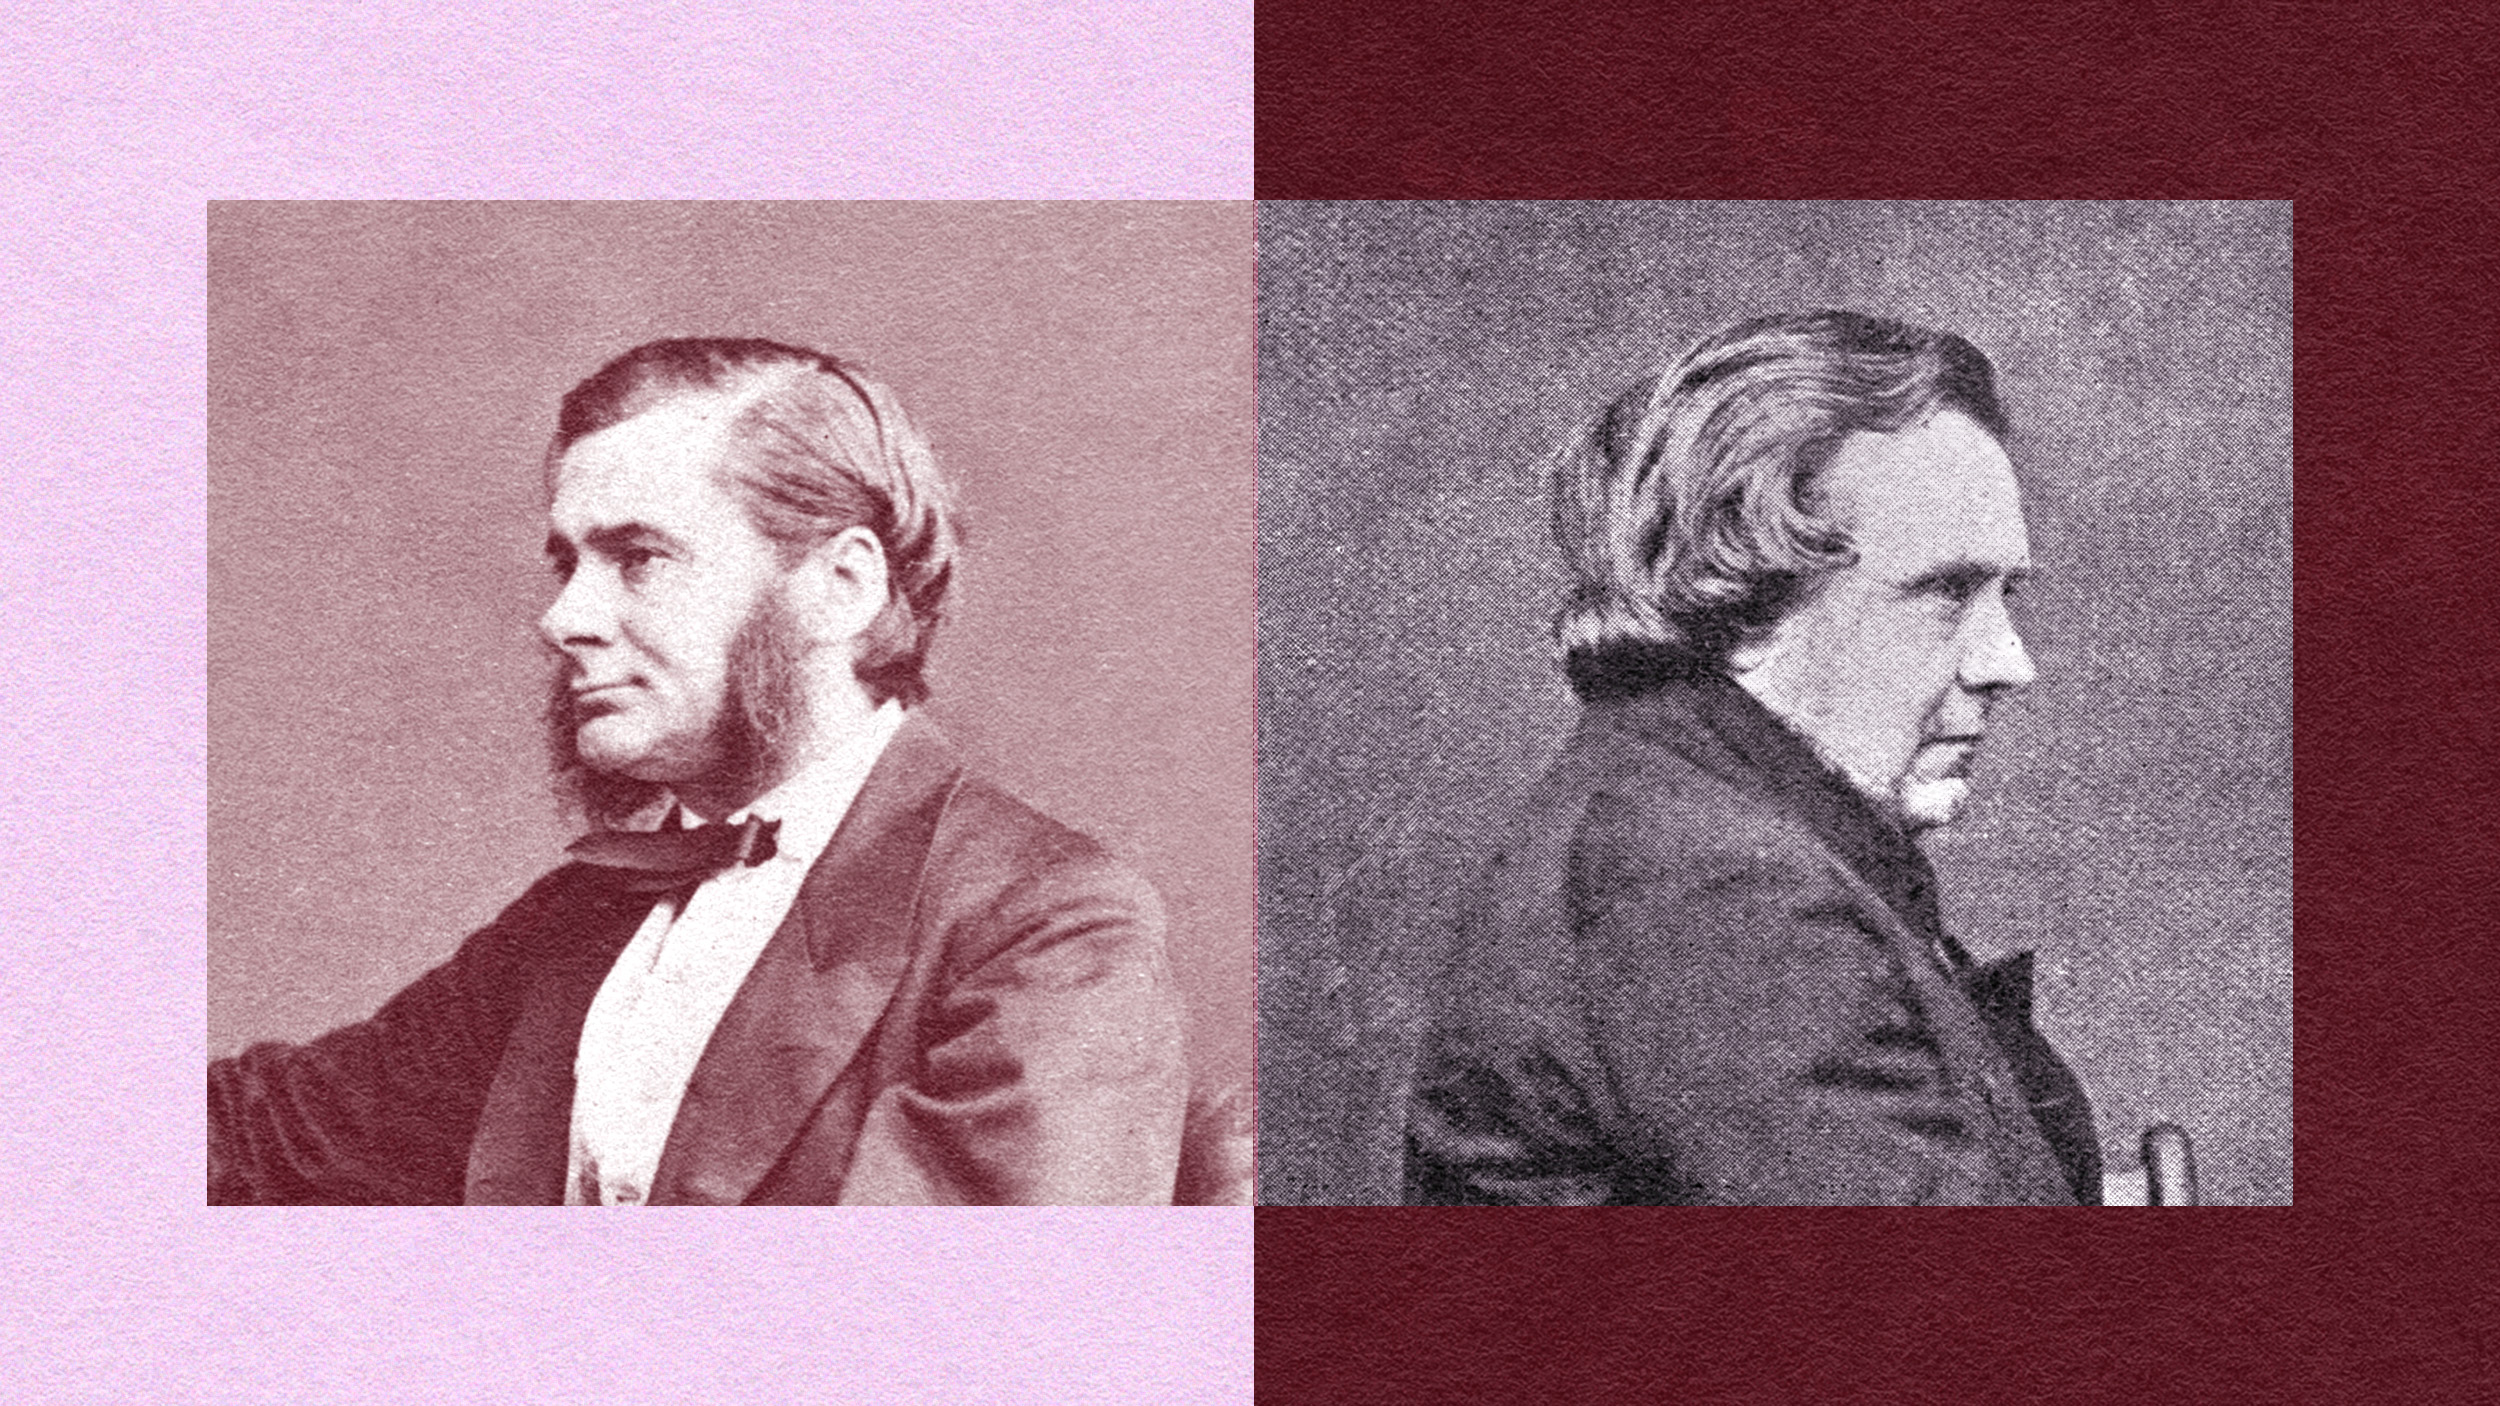 Side-by-side sepia-toned portrait images of huxley and wilberforce in 19th-century attire, facing opposite directions, merged with a vertical dividing line.